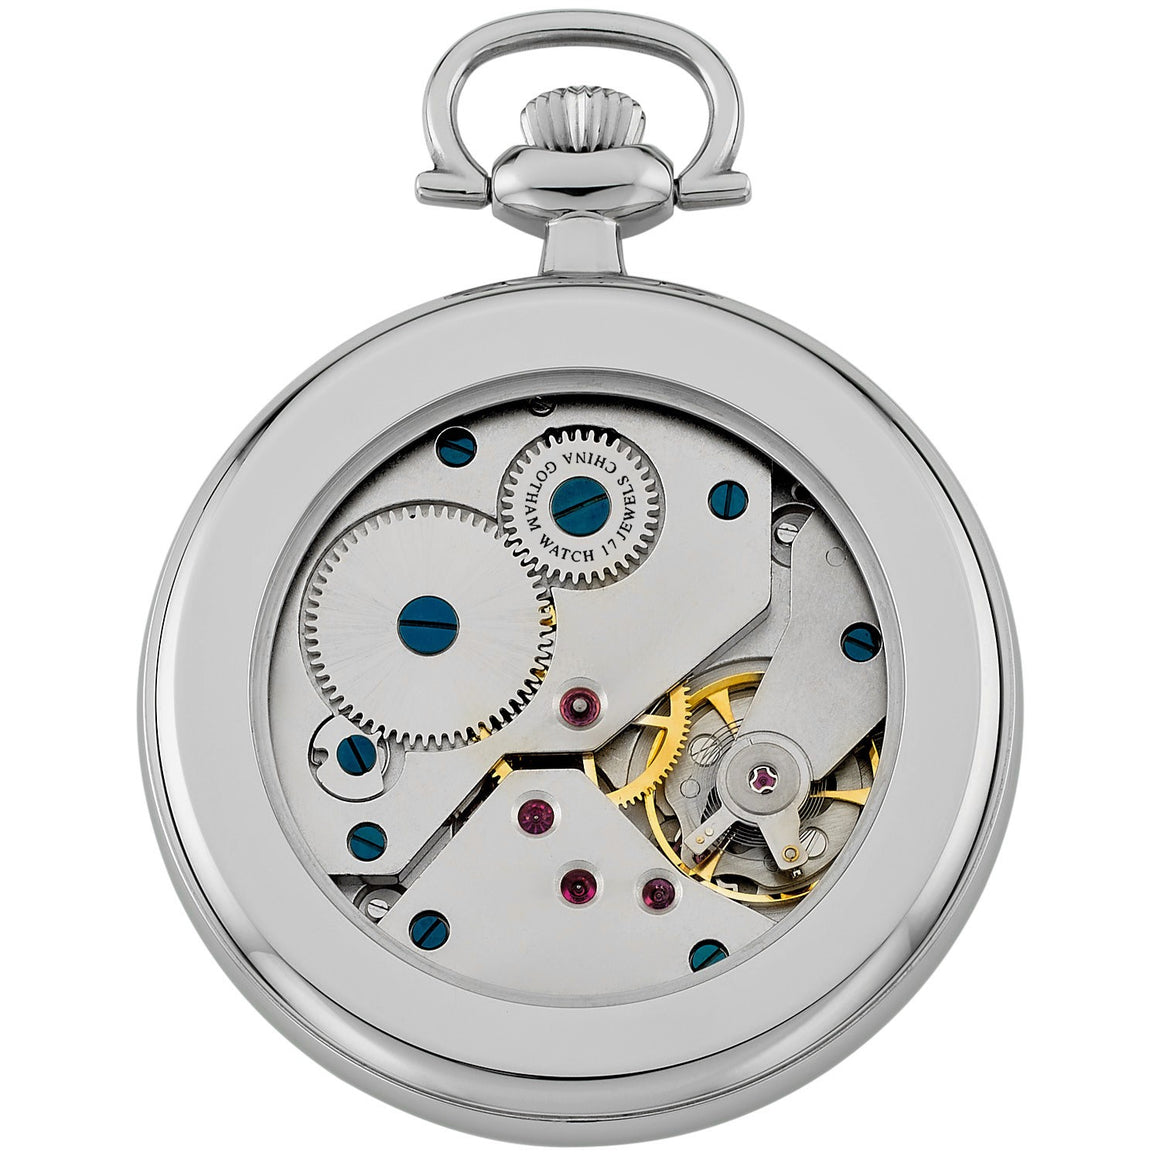 Gotham Classic Series Stainless Steel Open Face 17 Jewel Mechanical Hand Wind Pocket Watch # GWC14112S